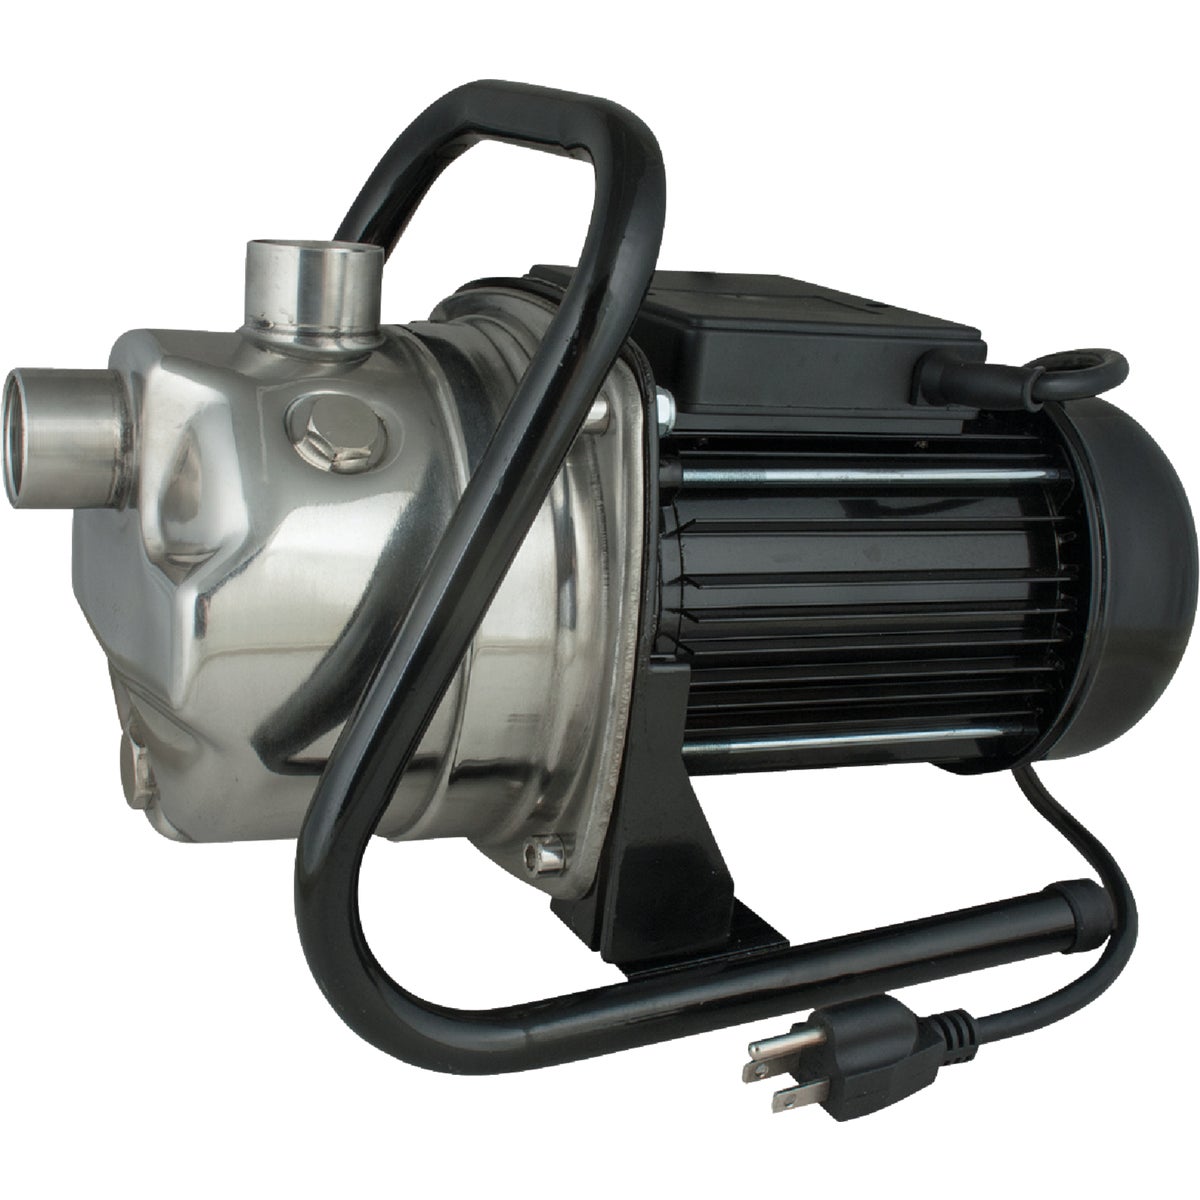 Item 432148, 1 HP (horsepower) stainless steel body pump, with 1 In.